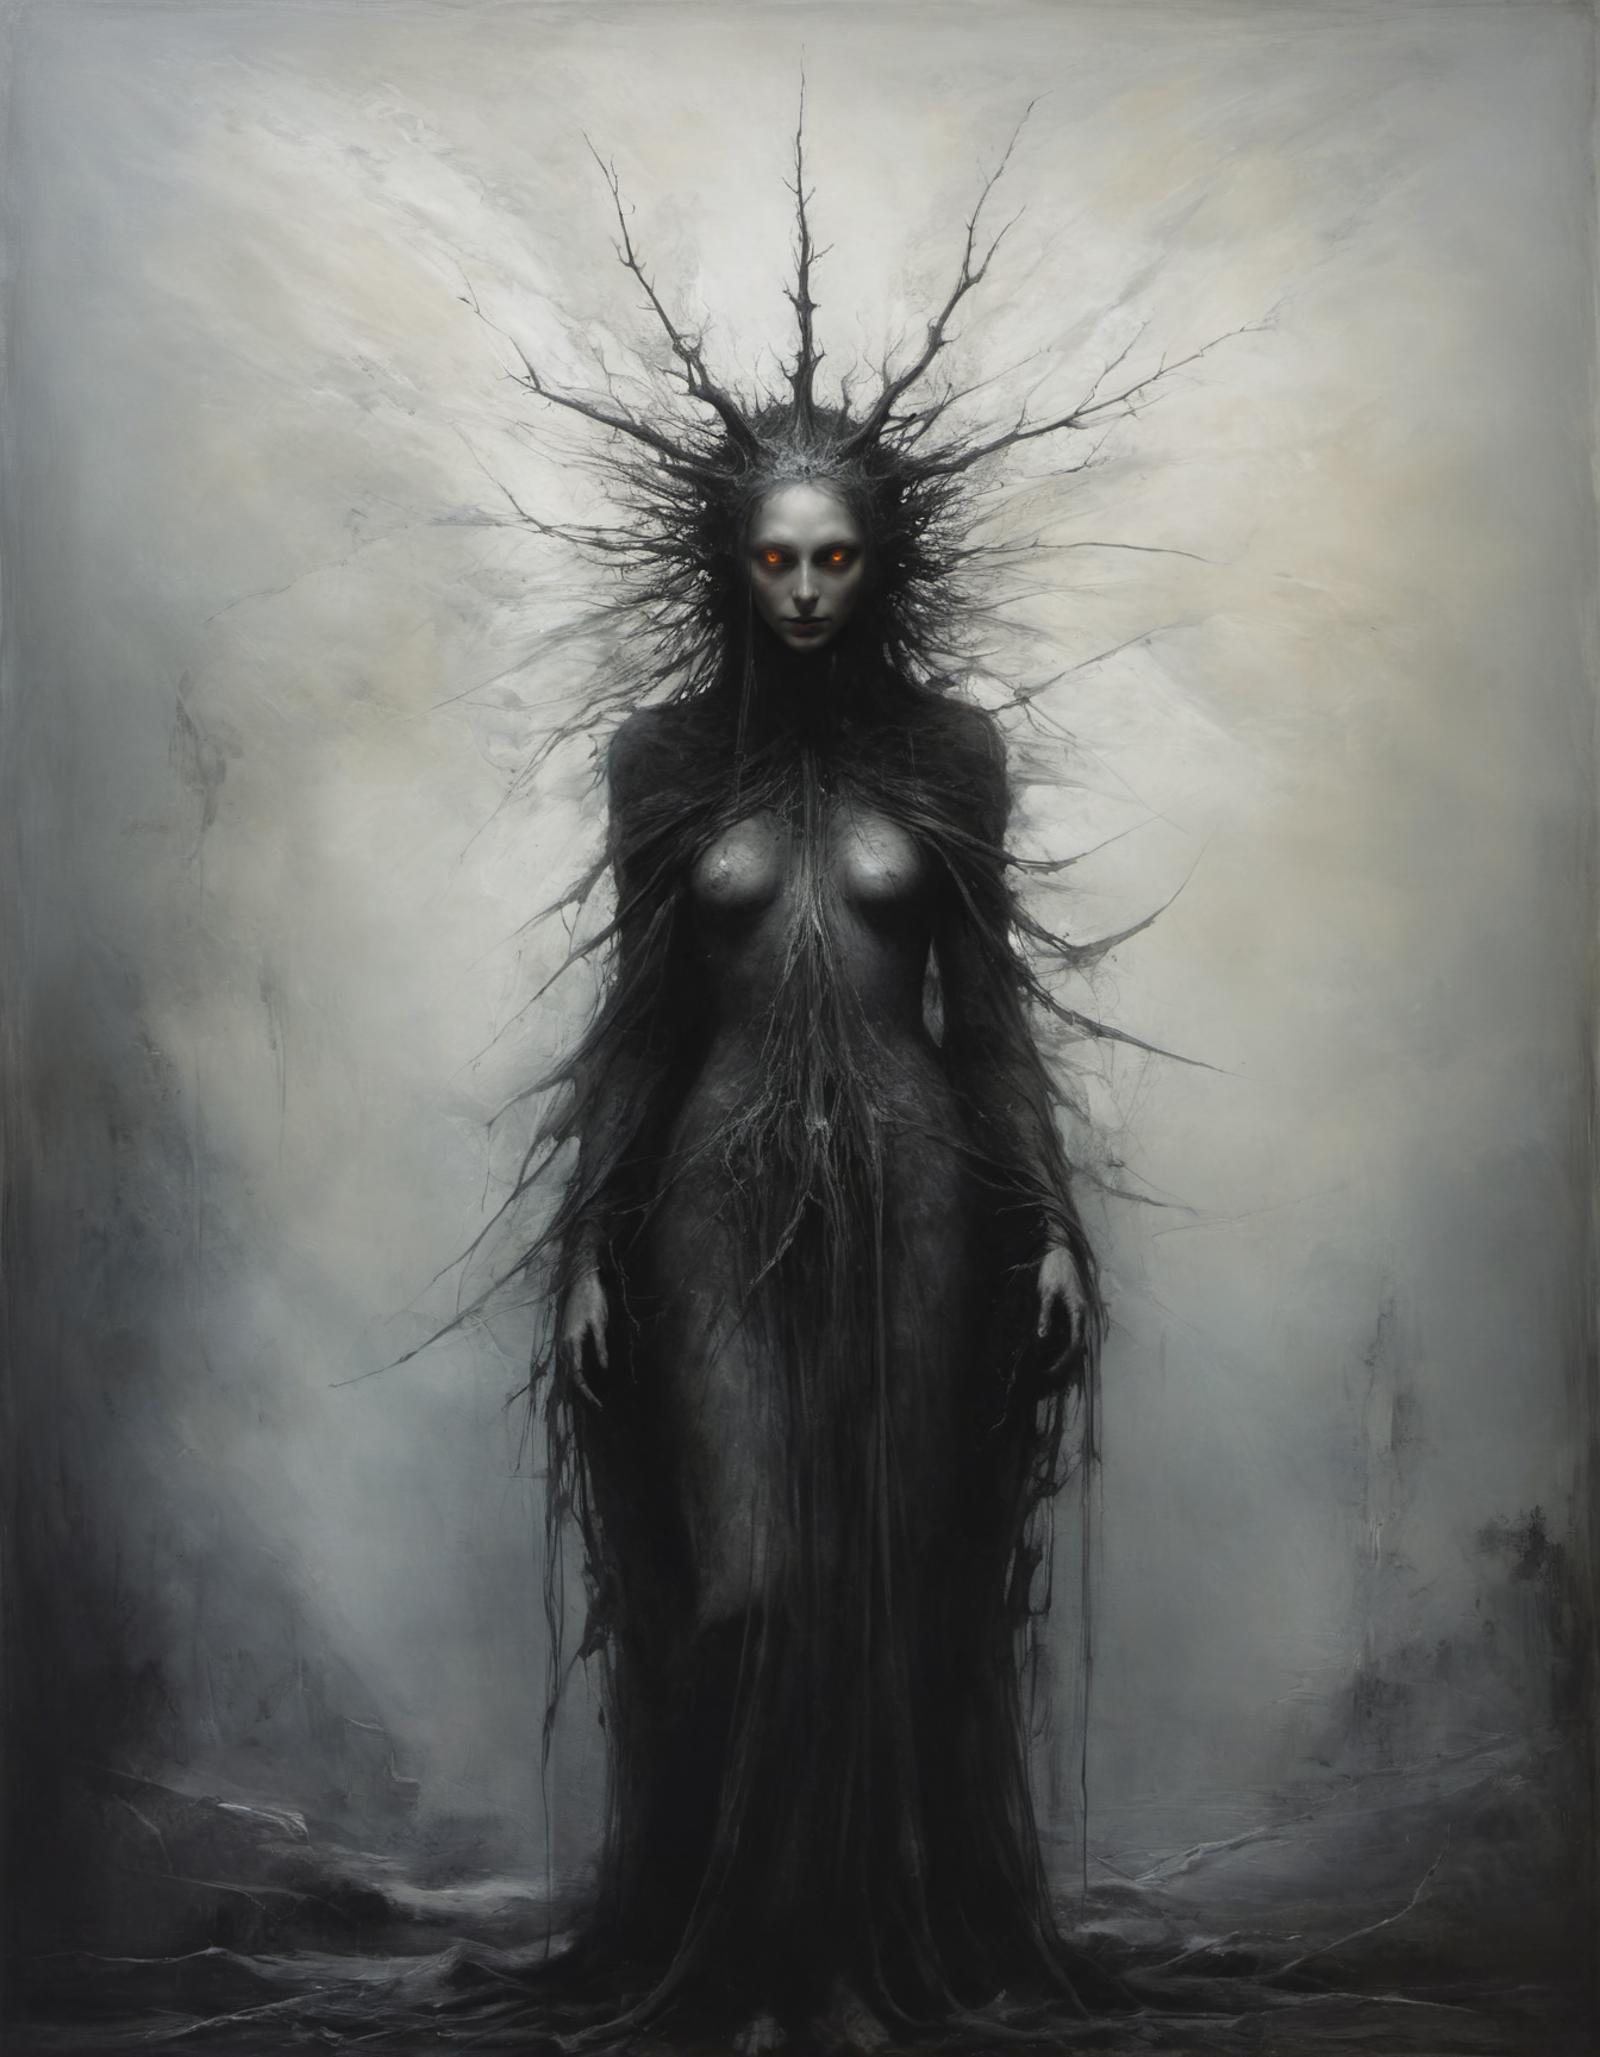 Dark and mysterious painting of a woman with dark hair, red eyes, and a dress made of tree branches.